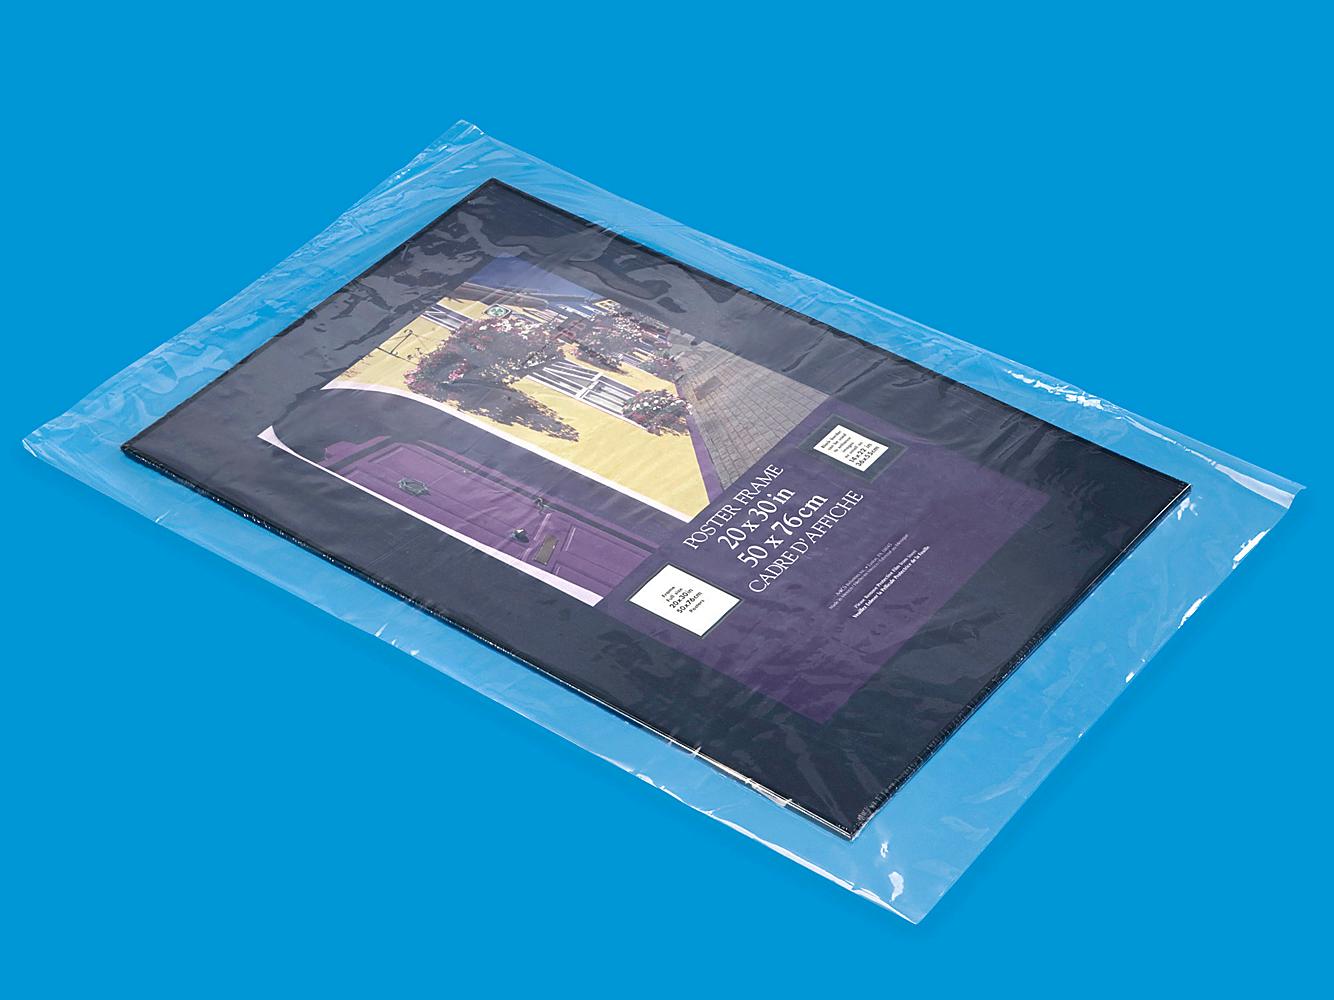 200 CLEAR 24 x 36 POLY BAGS PLASTIC LAY FLAT OPEN TOP PACKING ULINE BEST 1 MIL 